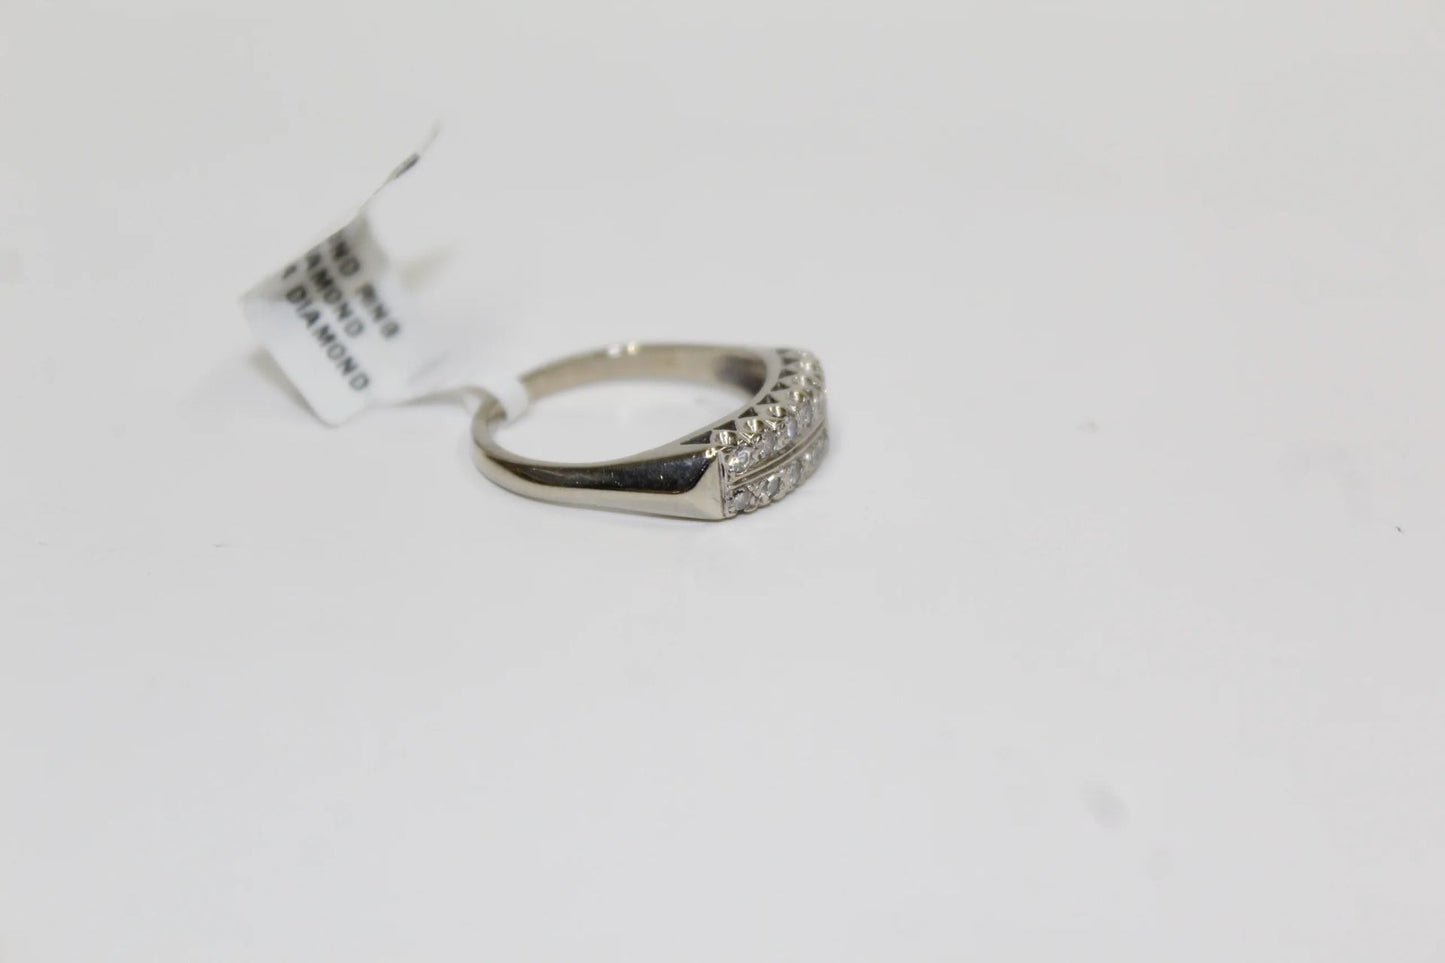 14K White Gold Diamond Two Row Band Ring (Size 6 1/4) Clearance Sale!!